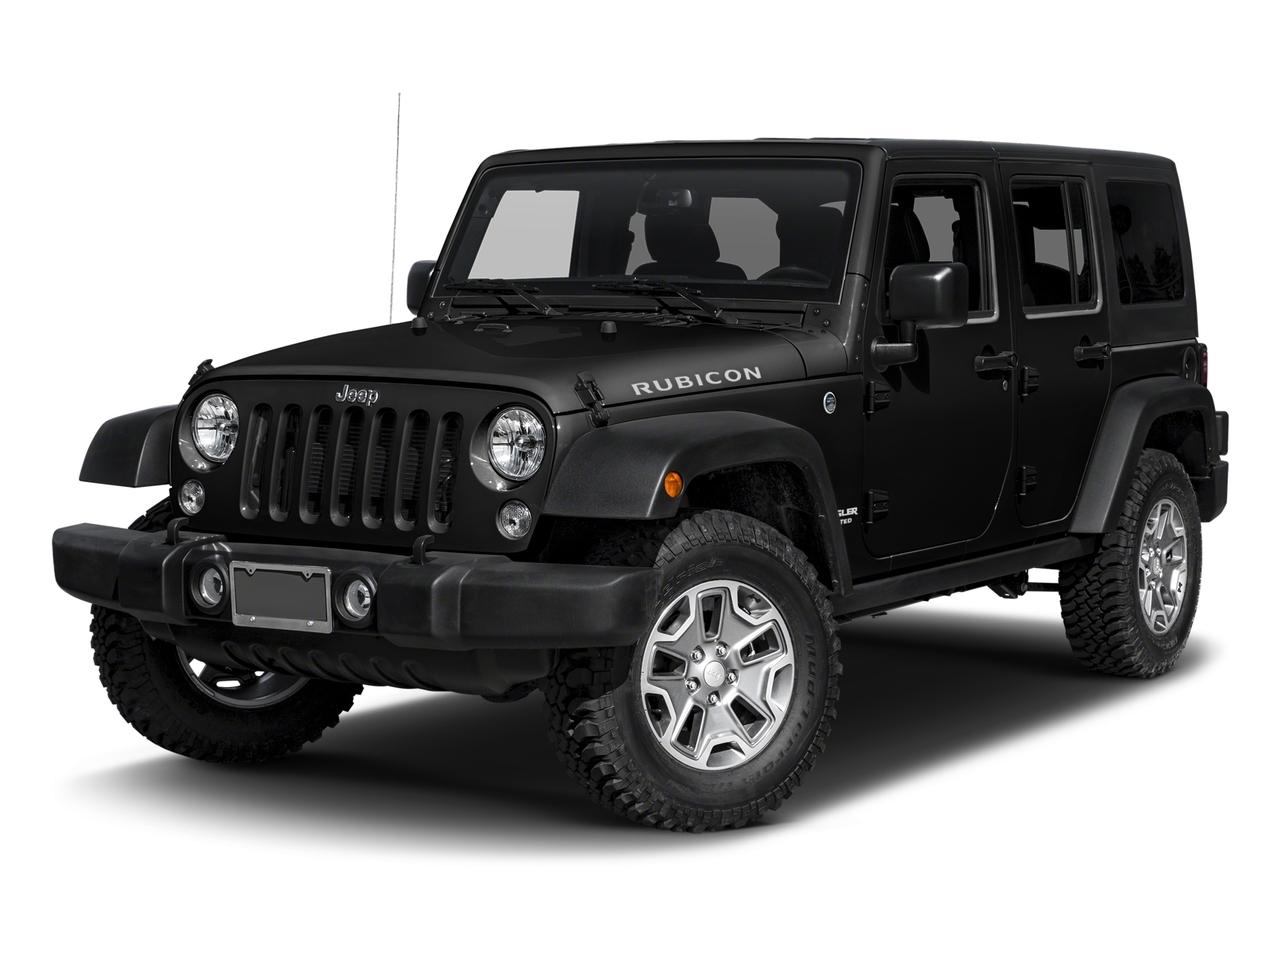 2016 Jeep Wrangler Unlimited Vehicle Photo in WENTZVILLE, MO 63385-1017